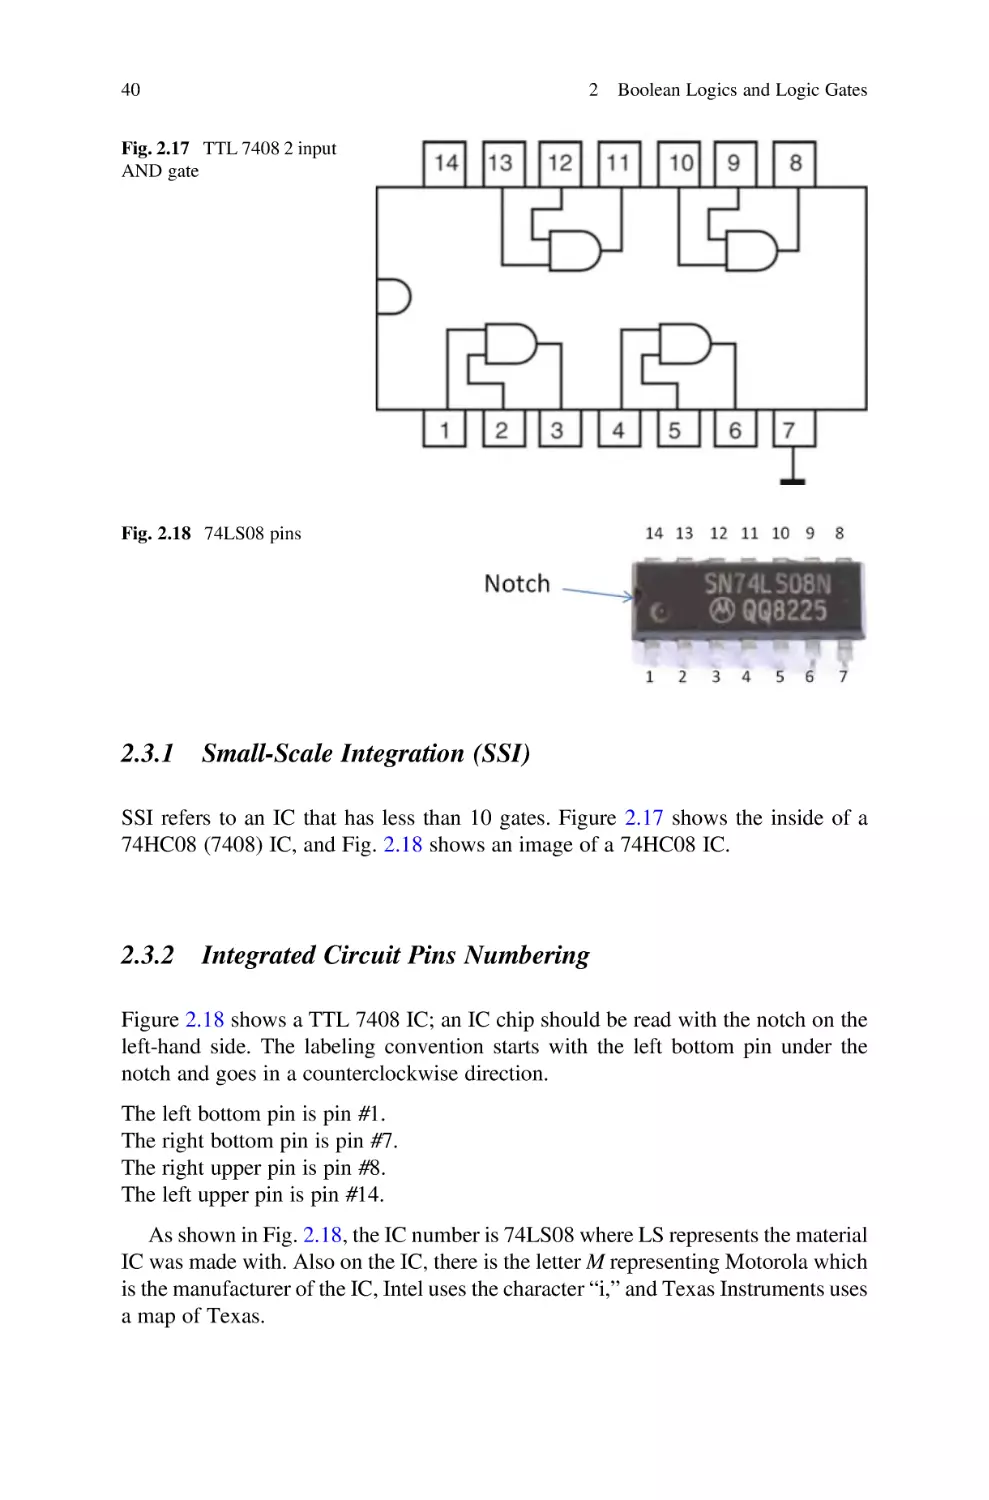 2.3.1 Small-Scale Integration (SSI)
2.3.2 Integrated Circuit Pins Numbering